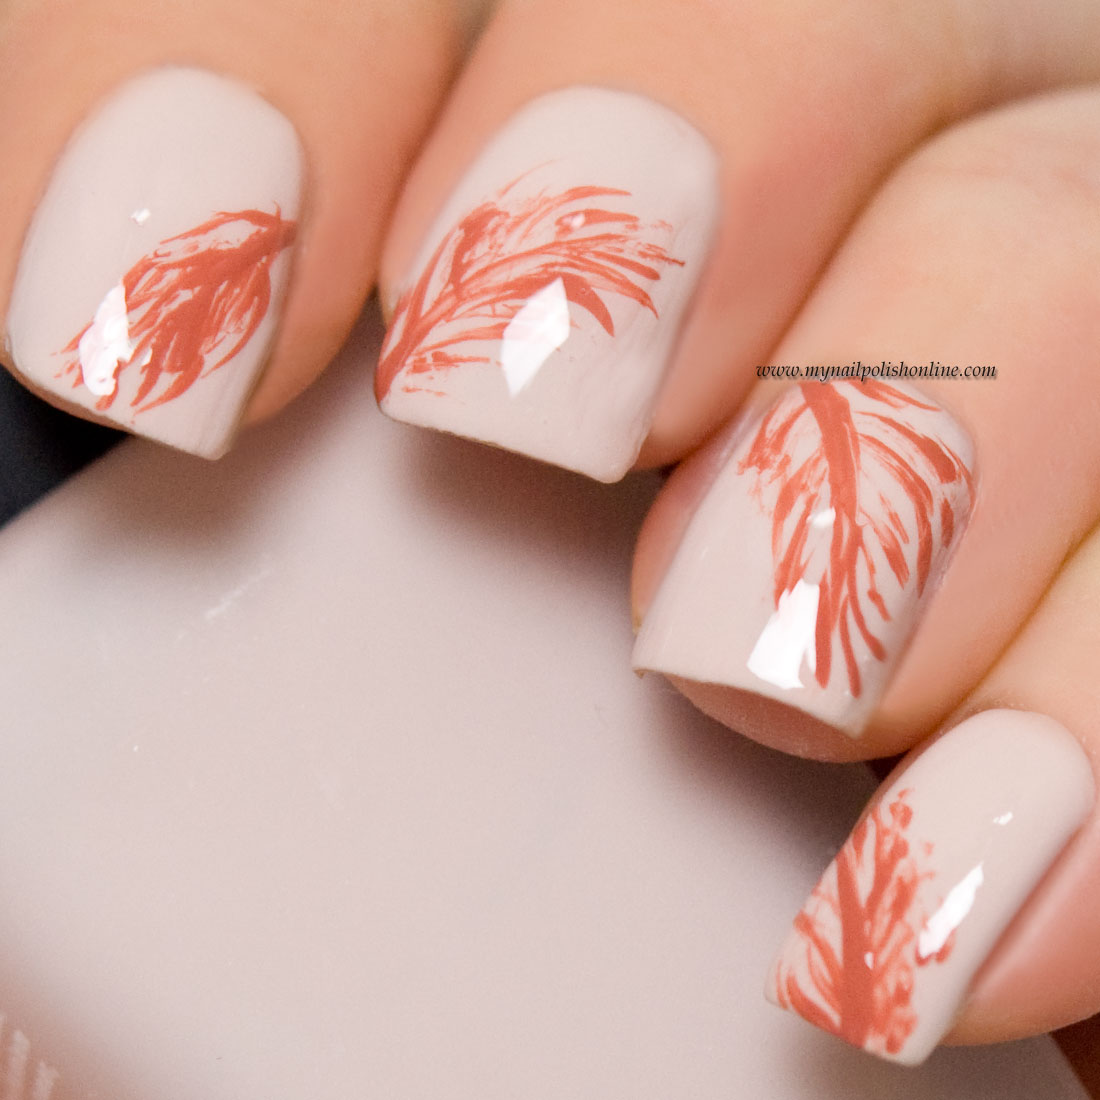 Nail art with feathers